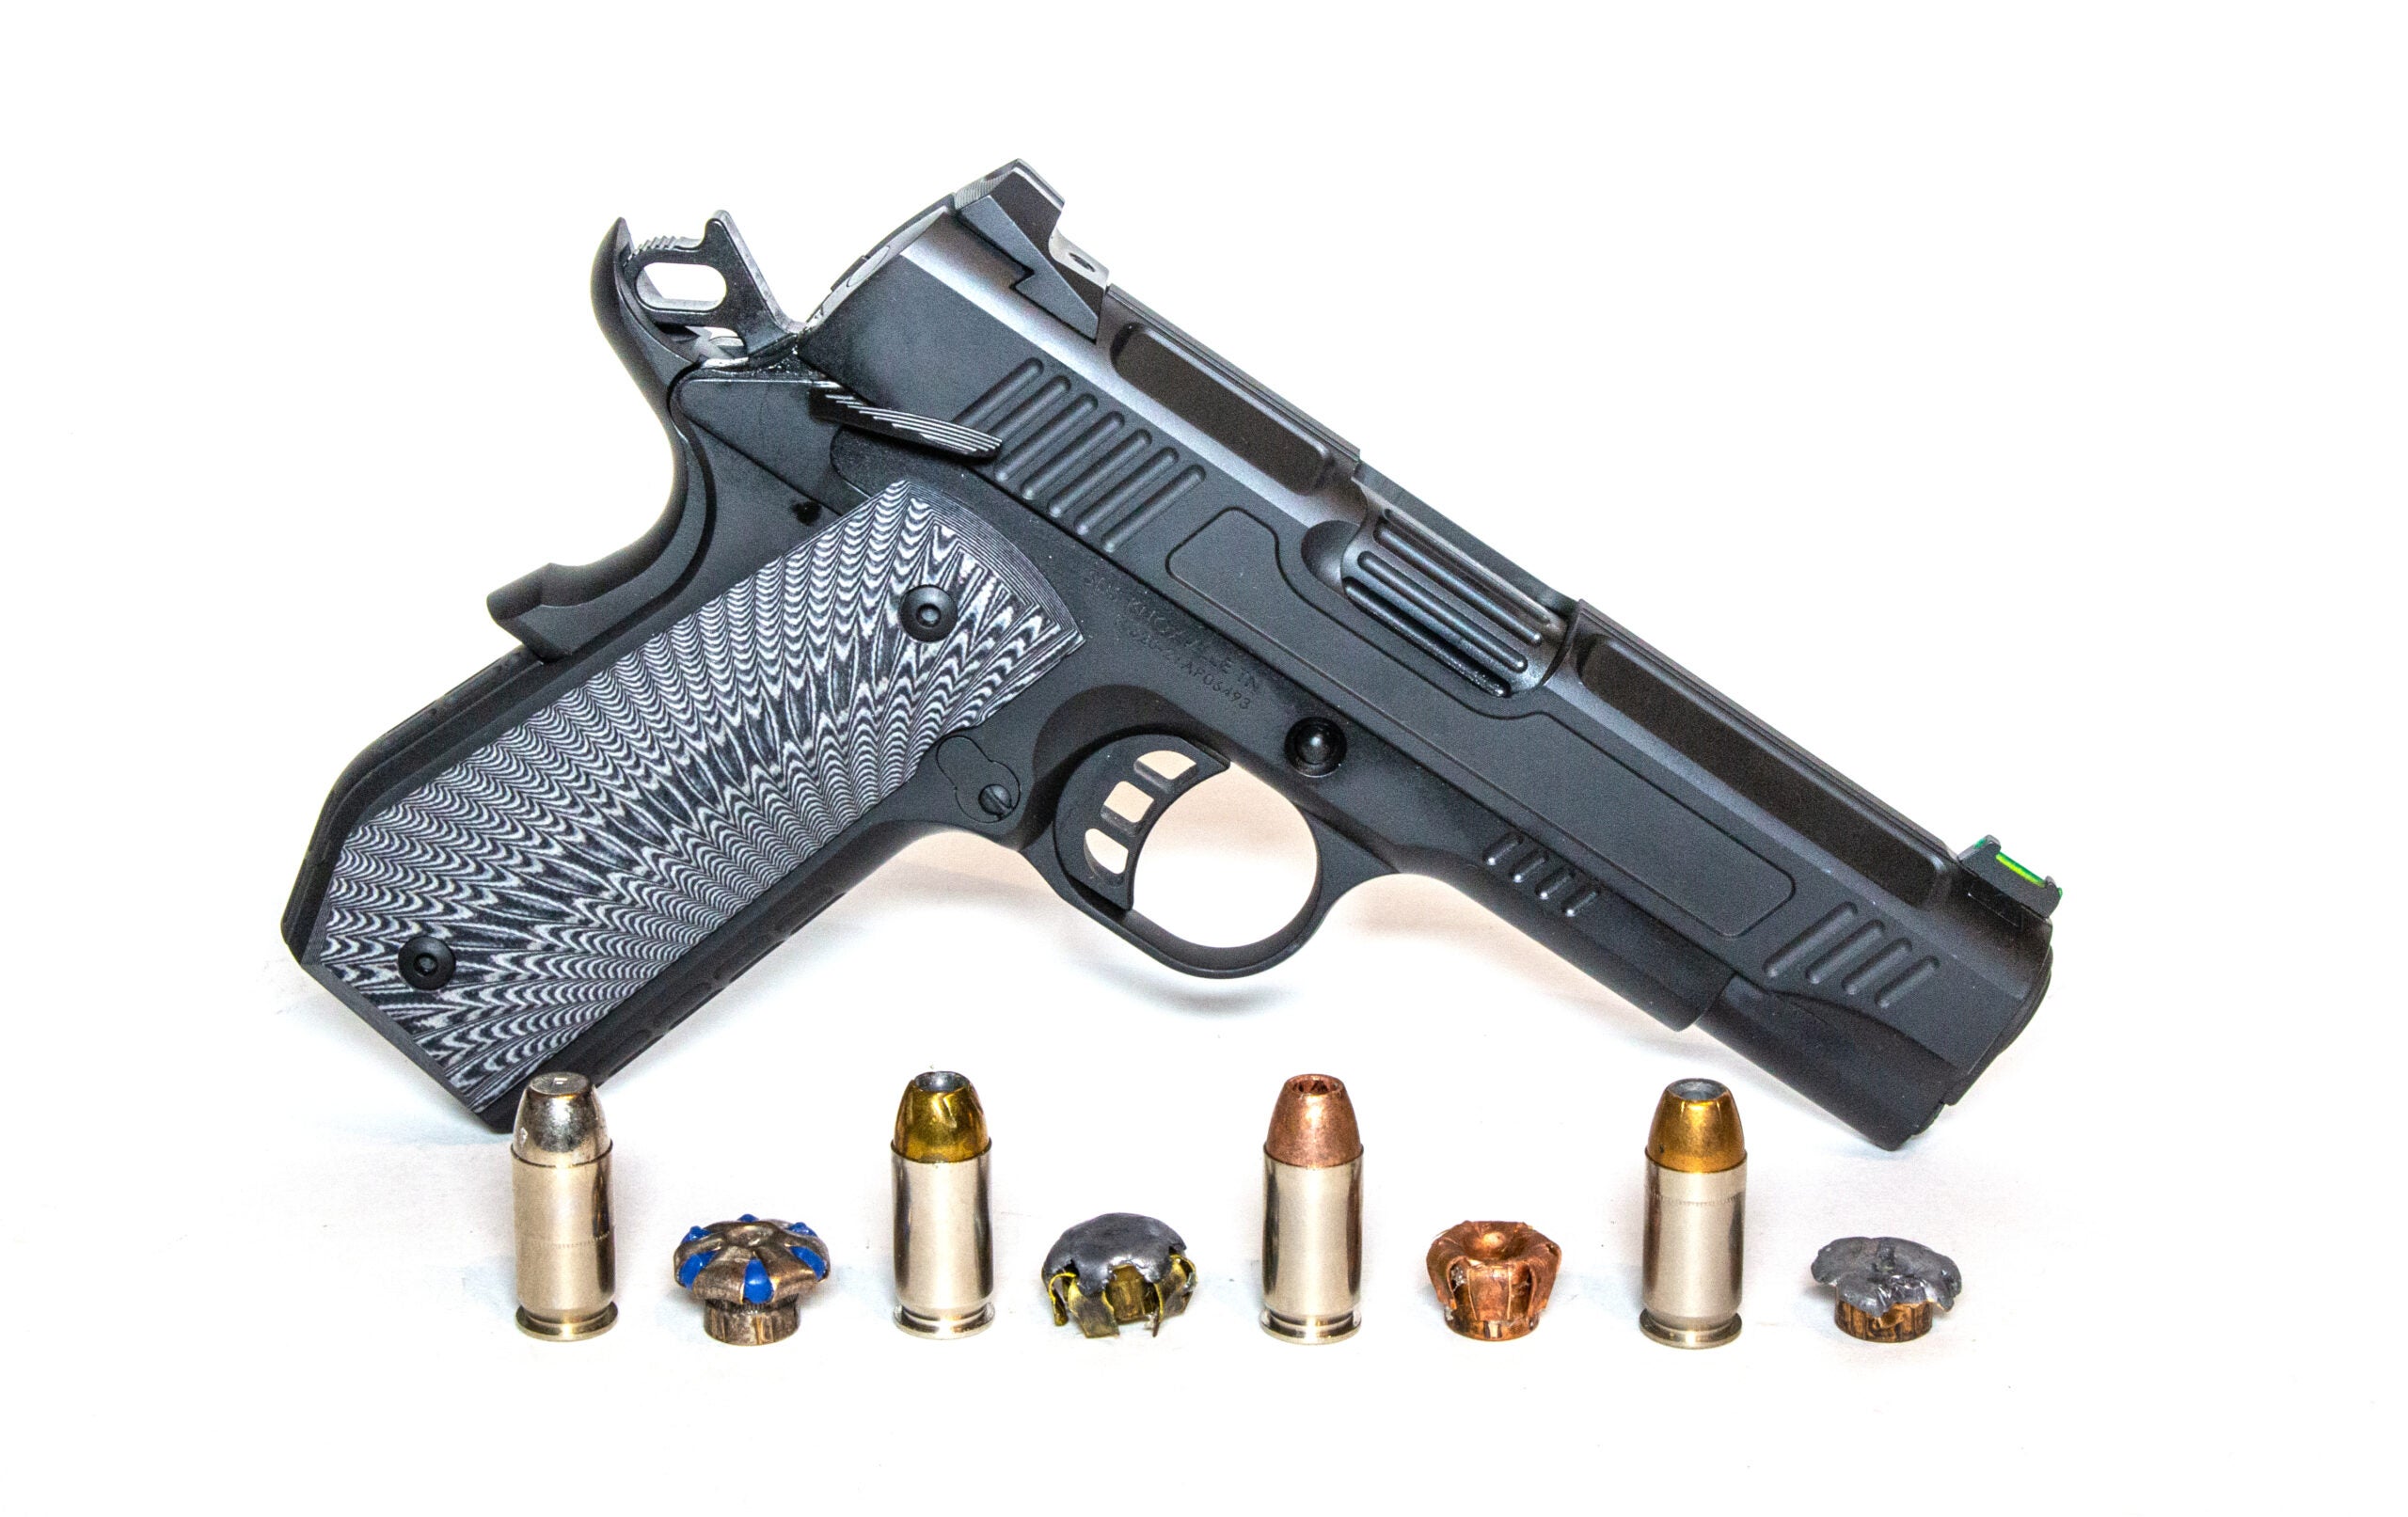 45 ACP Single-Stack Pistols: S&W Pulls Out a Surprise Win - Gun Tests